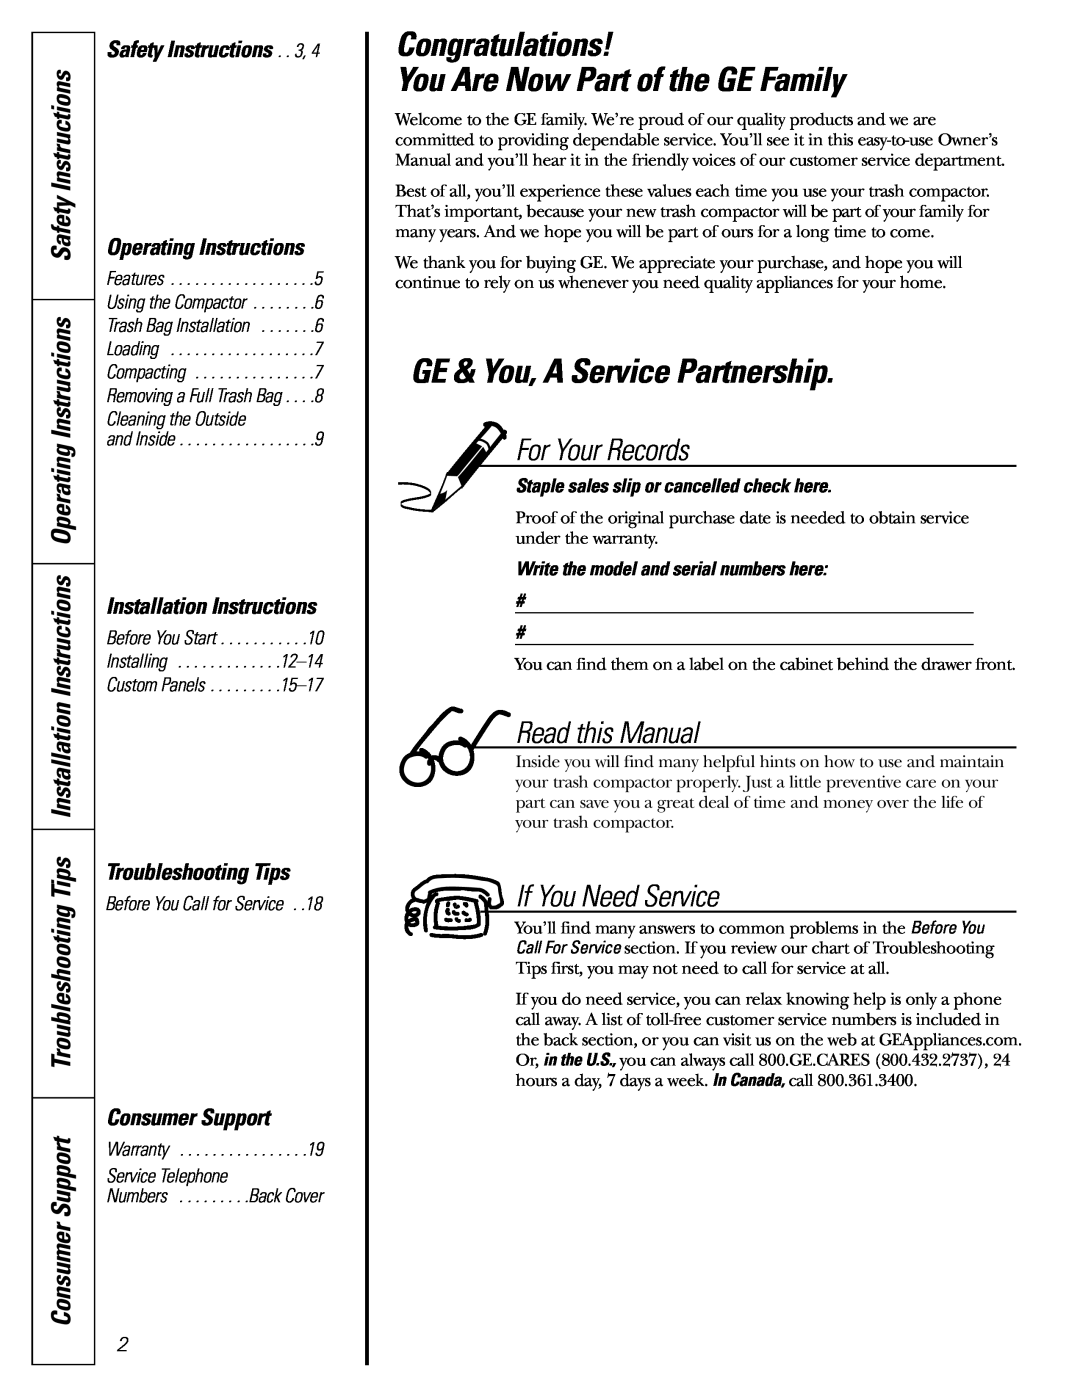 GE GCG1520 Congratulations You Are Now Part of the GE Family, GE & You, A Service Partnership, Installation Instructions 